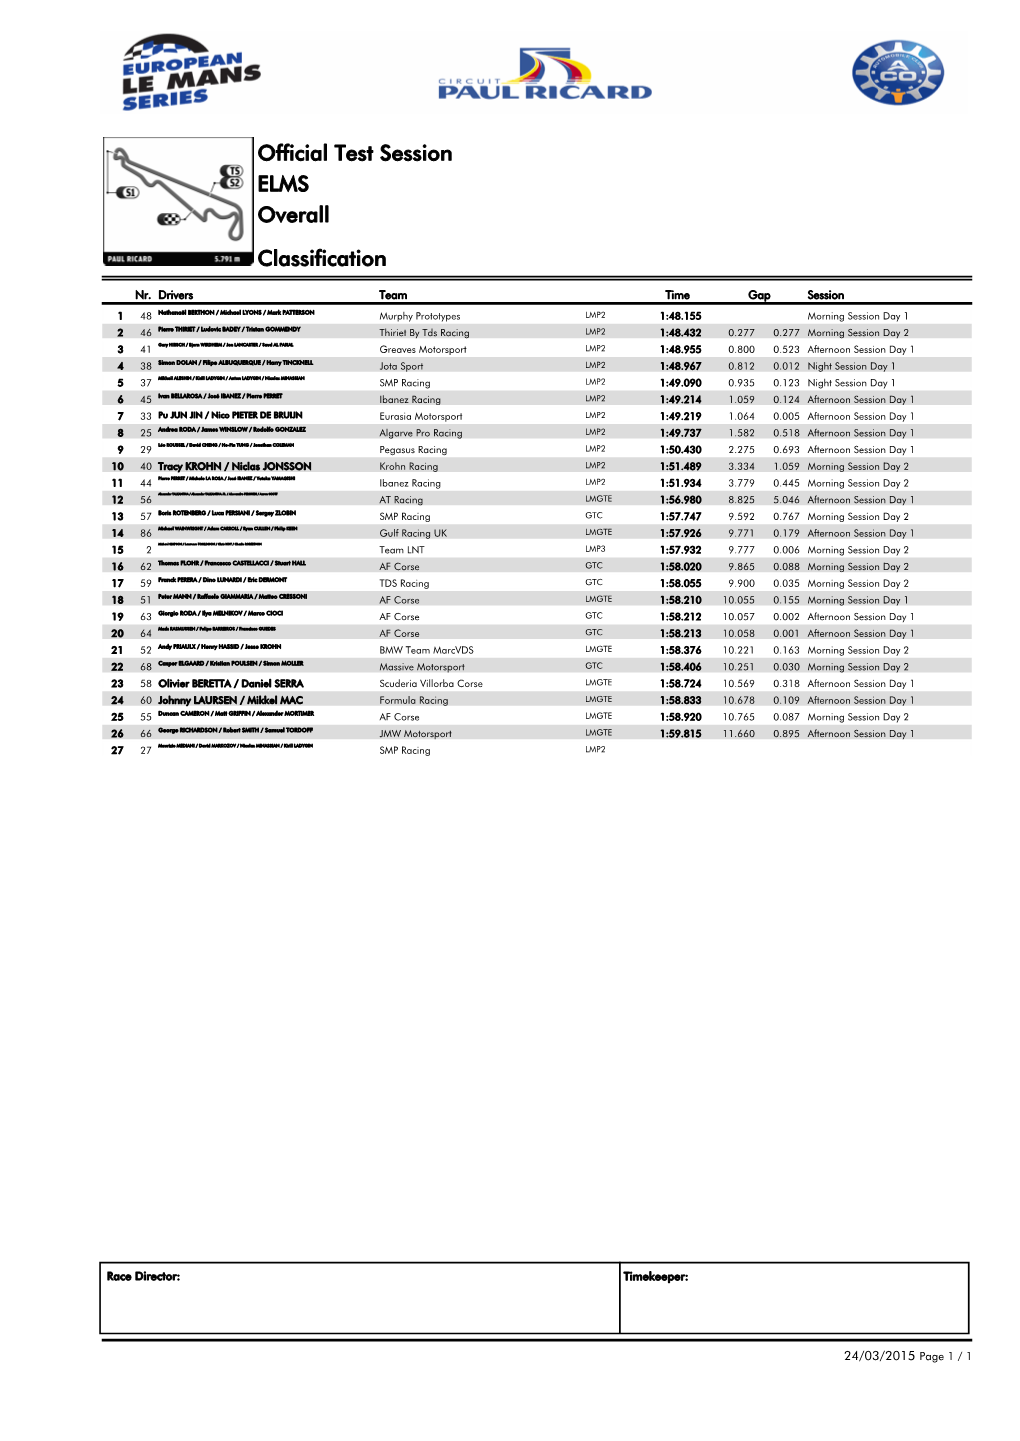 Classification Overall ELMS Official Test Session